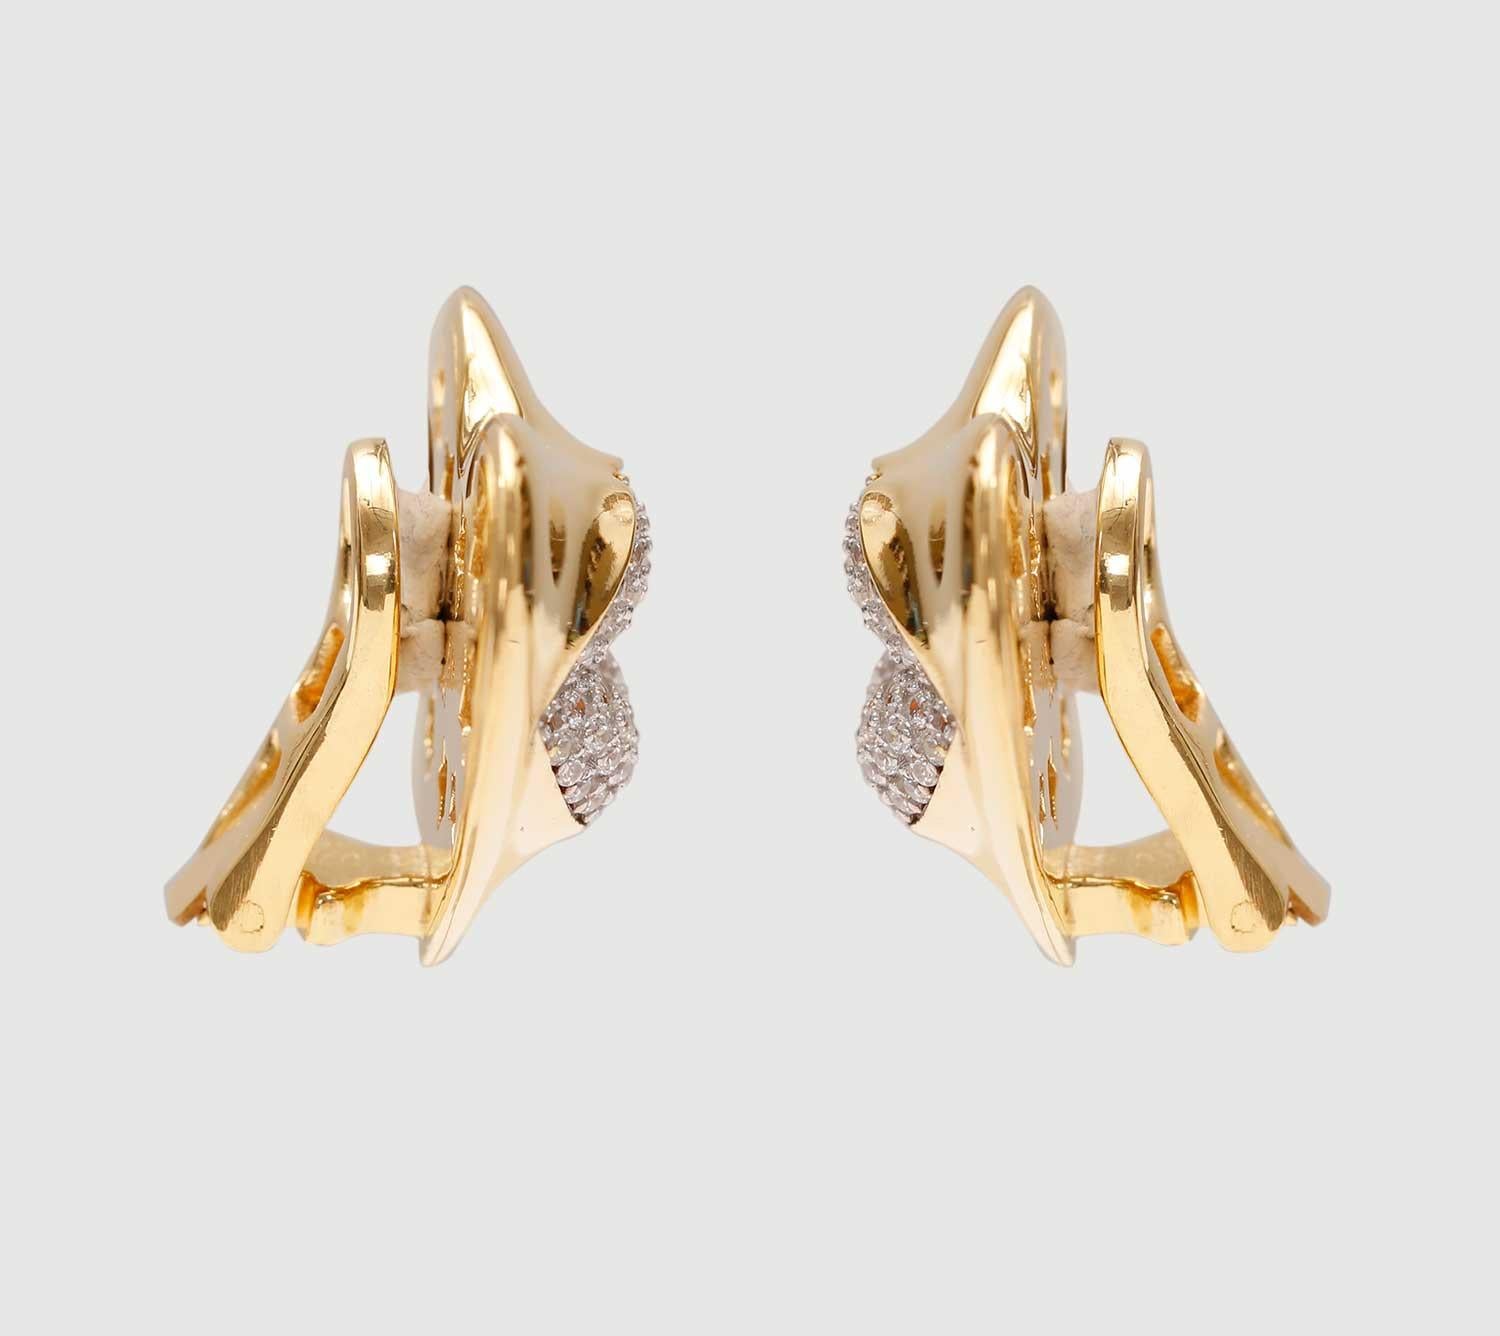 Love starts with the heart and lasts on the lips. These might be the sexiest earrings ever! Our sexy gold statement heart earrings with crystal kisses. Shine your love on!

Composition: Sterling Silver, 18k gold vermeil and Rhodium plated.
Color: